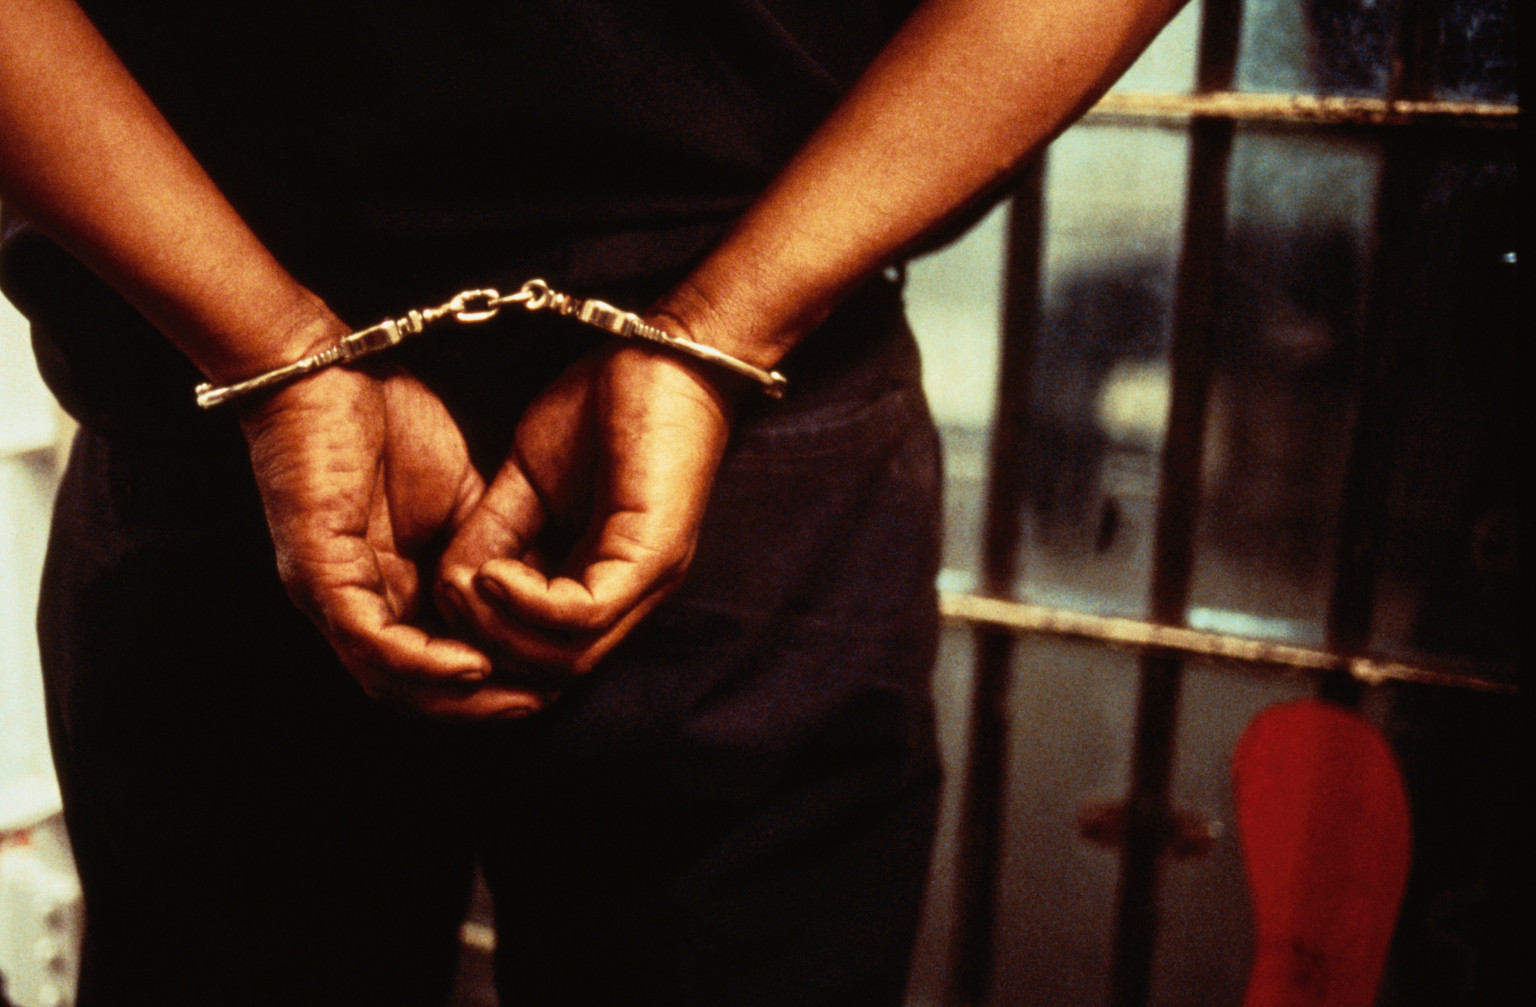 Five arrested for attempting to kidnap boy, 14